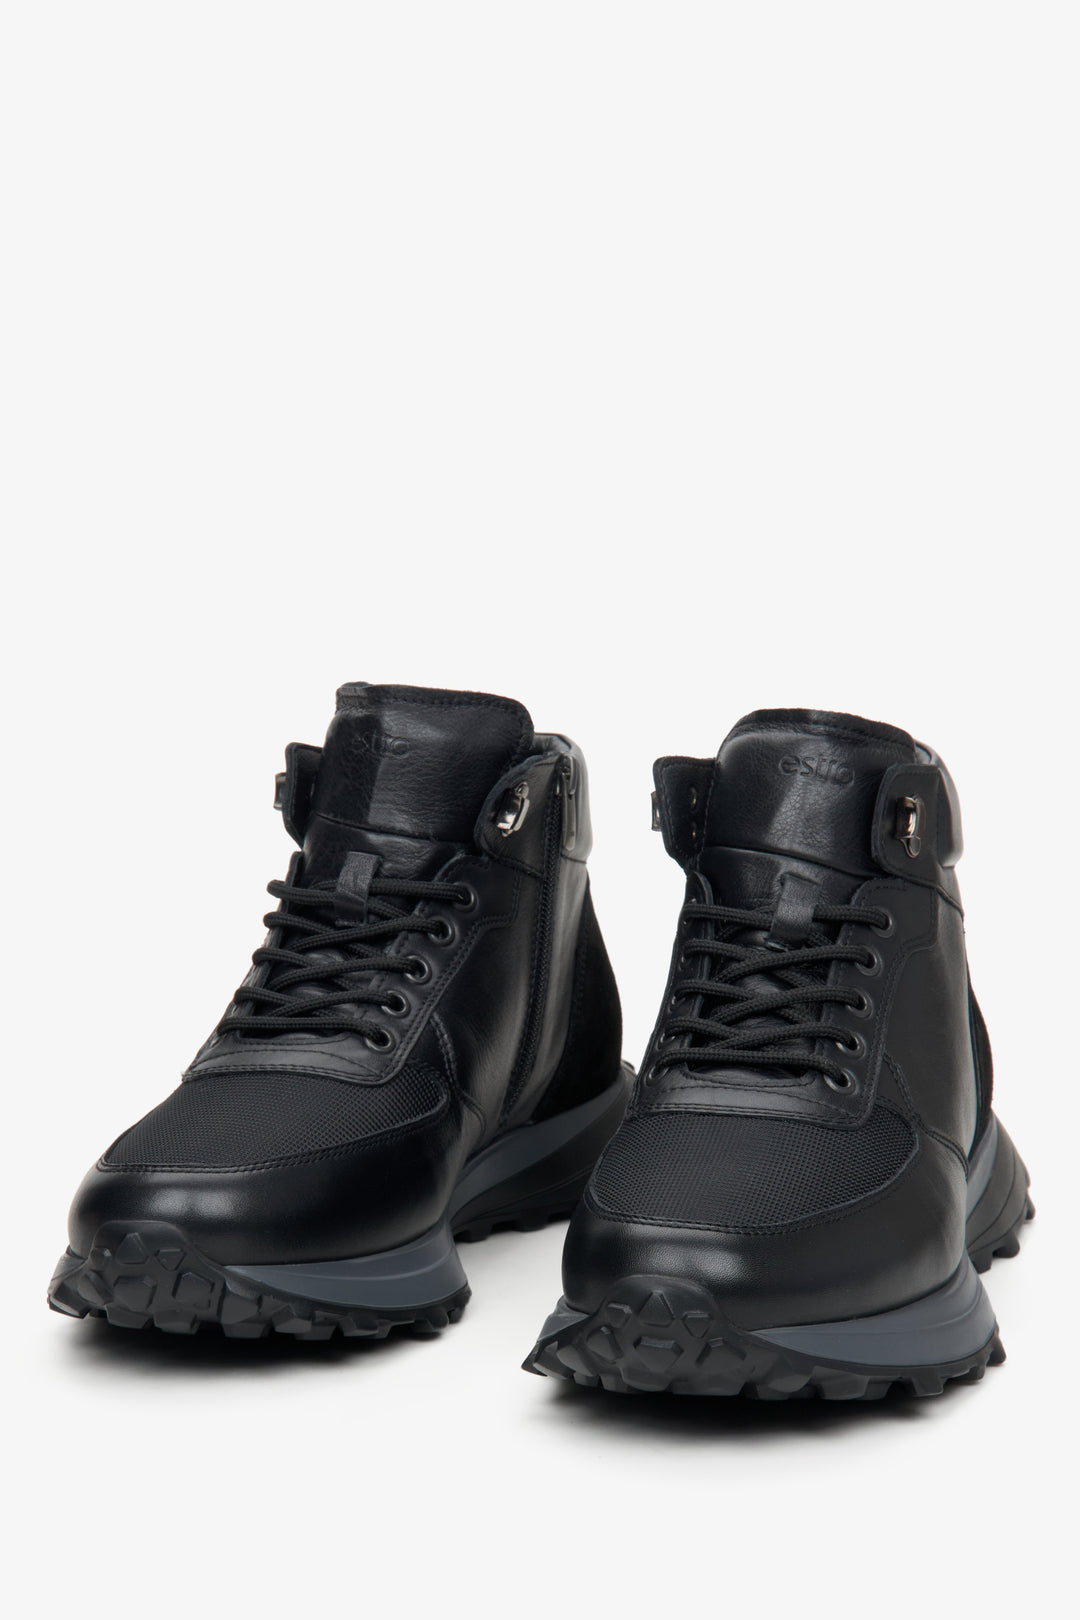 Men's black high-top winter sneakers made of mixed materials by Estro.